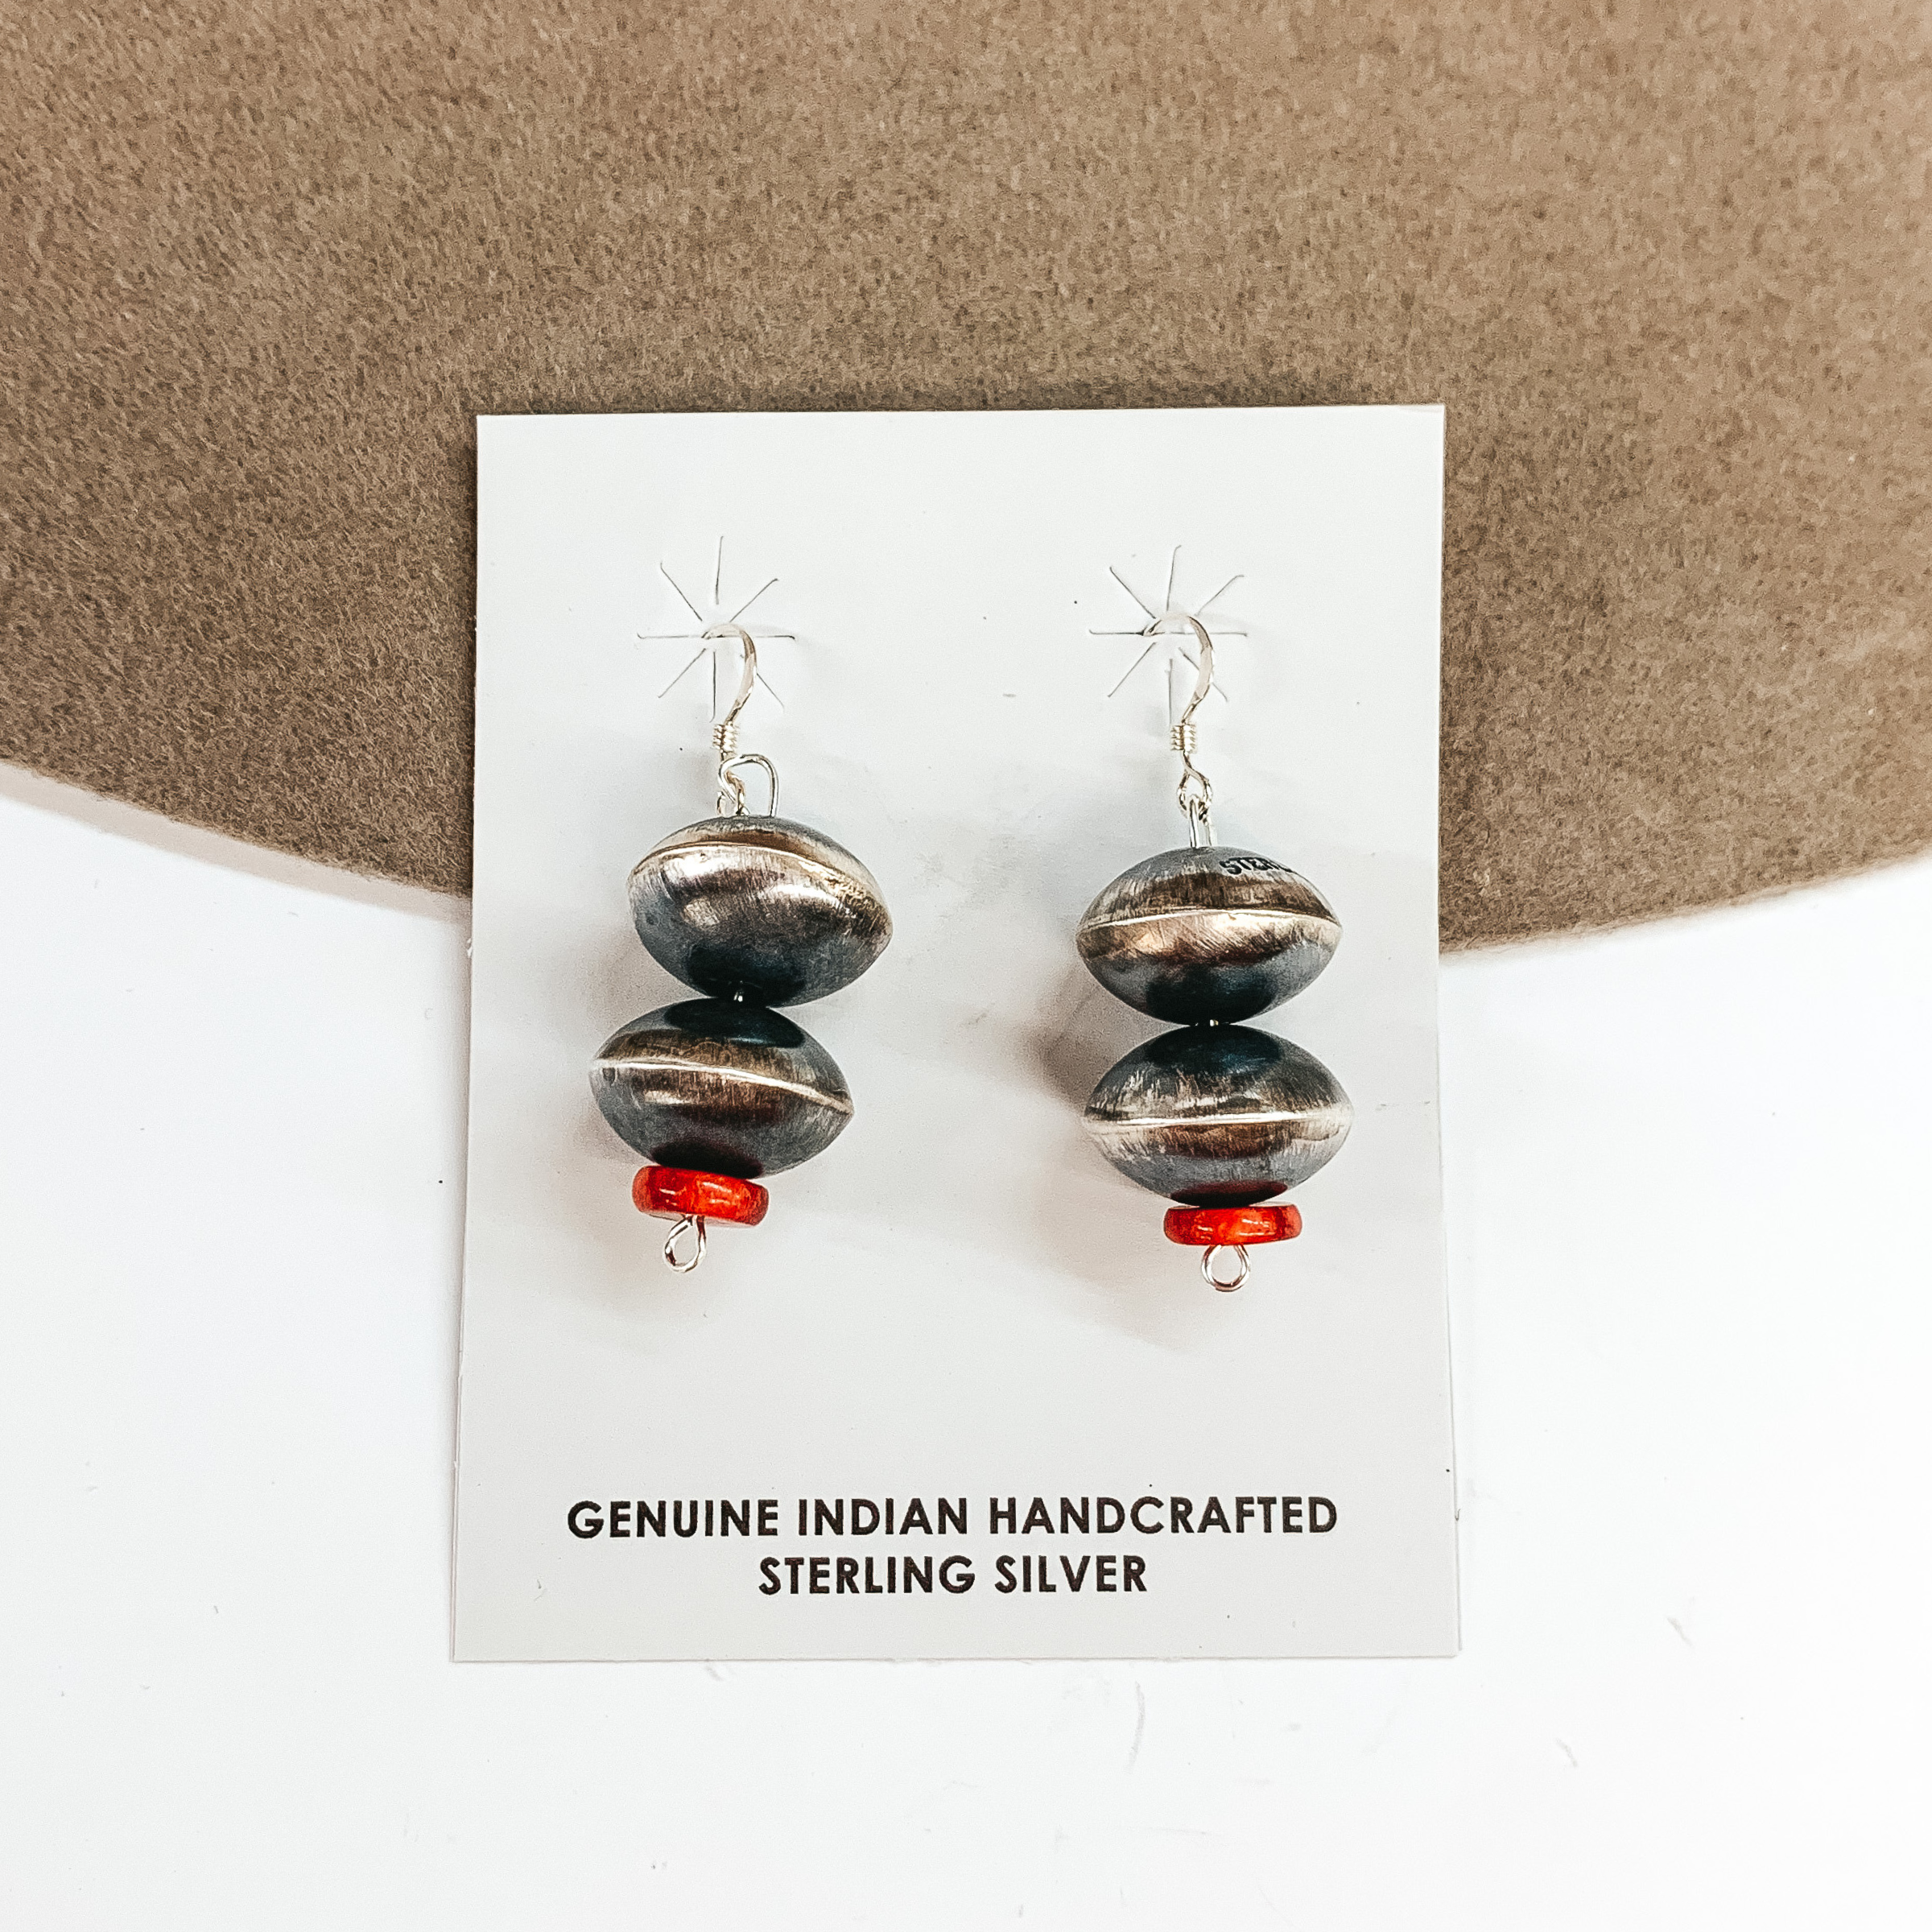 The earrings pictured include fish hook earrings with a two saucer pearl drop and a red stone at the bottom. These earrings are pictured on a tan and white background. 